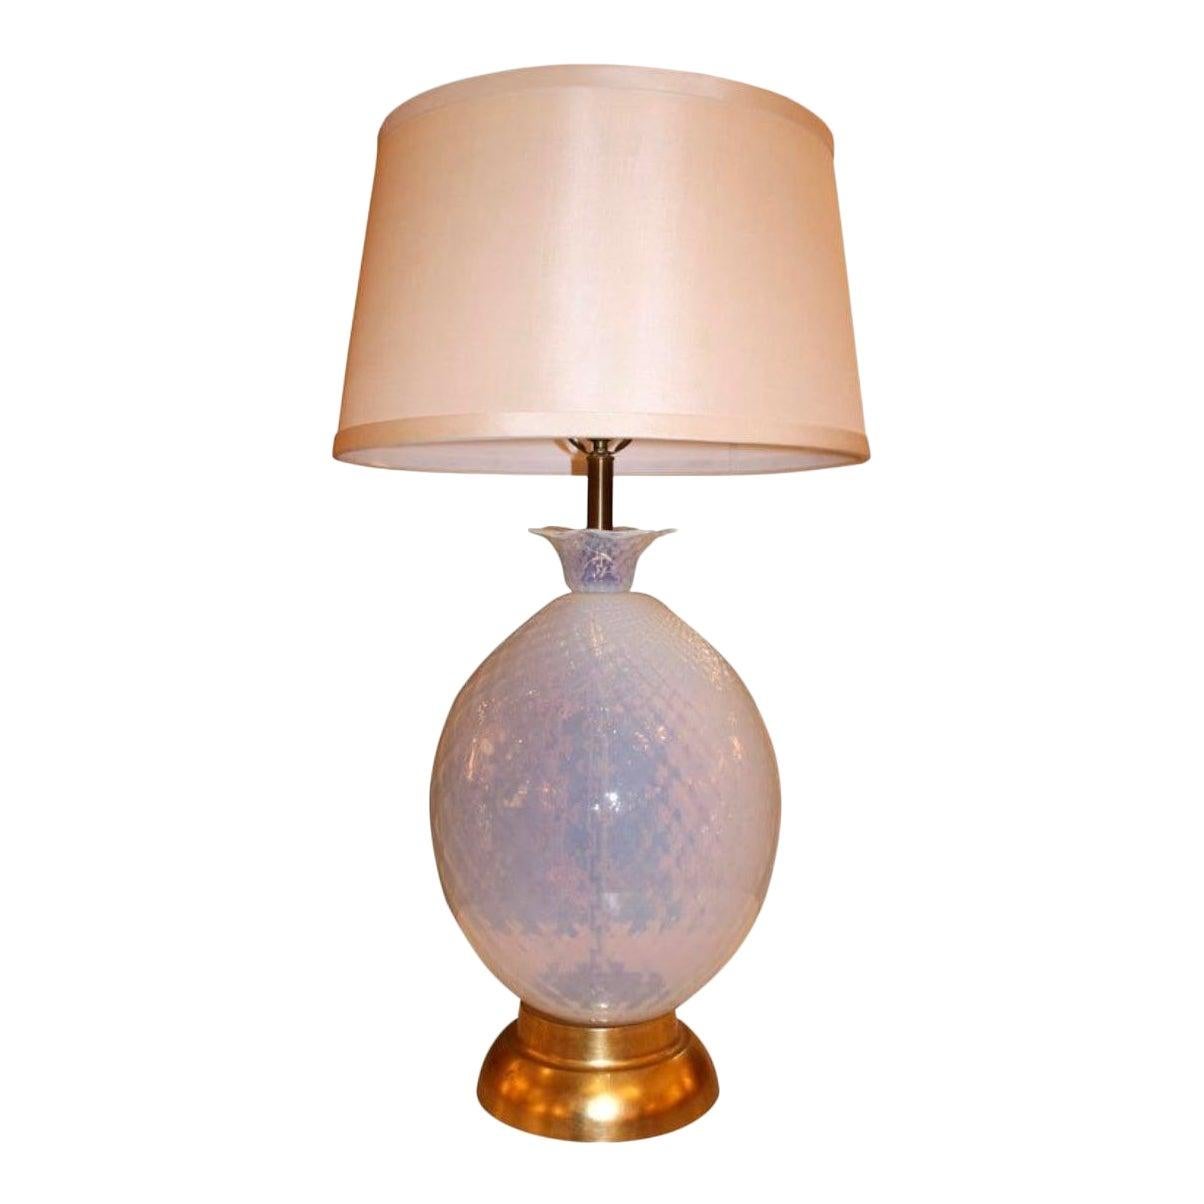 Marbro 1950s Italian Seguso Murano Glass Pineapple Table Lamp In Good Condition For Sale In LOS ANGELES, CA